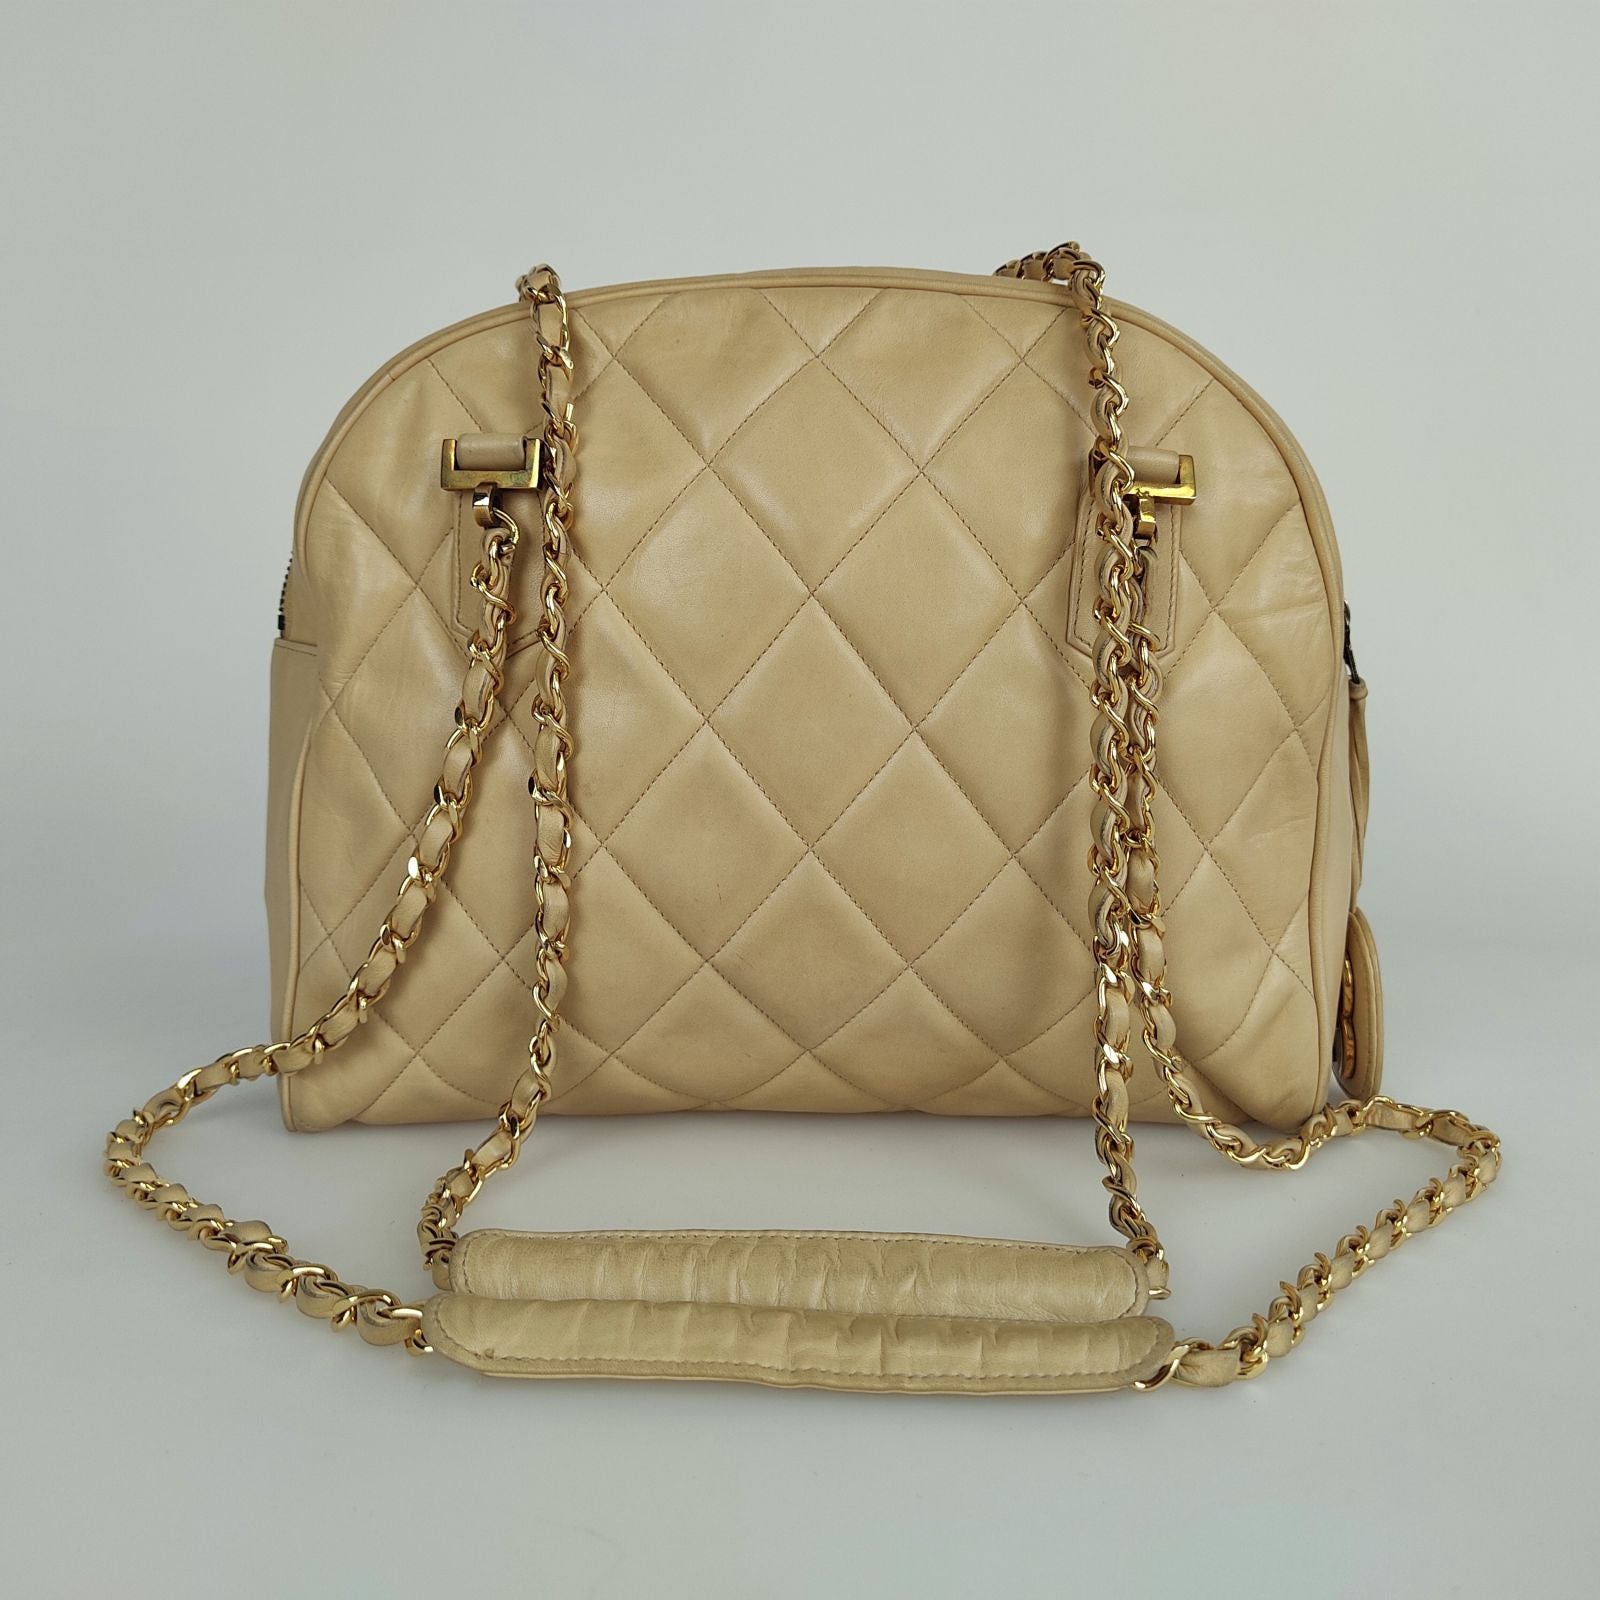 Chanel shoulder bag in beige matelassé leather from the 80s ref